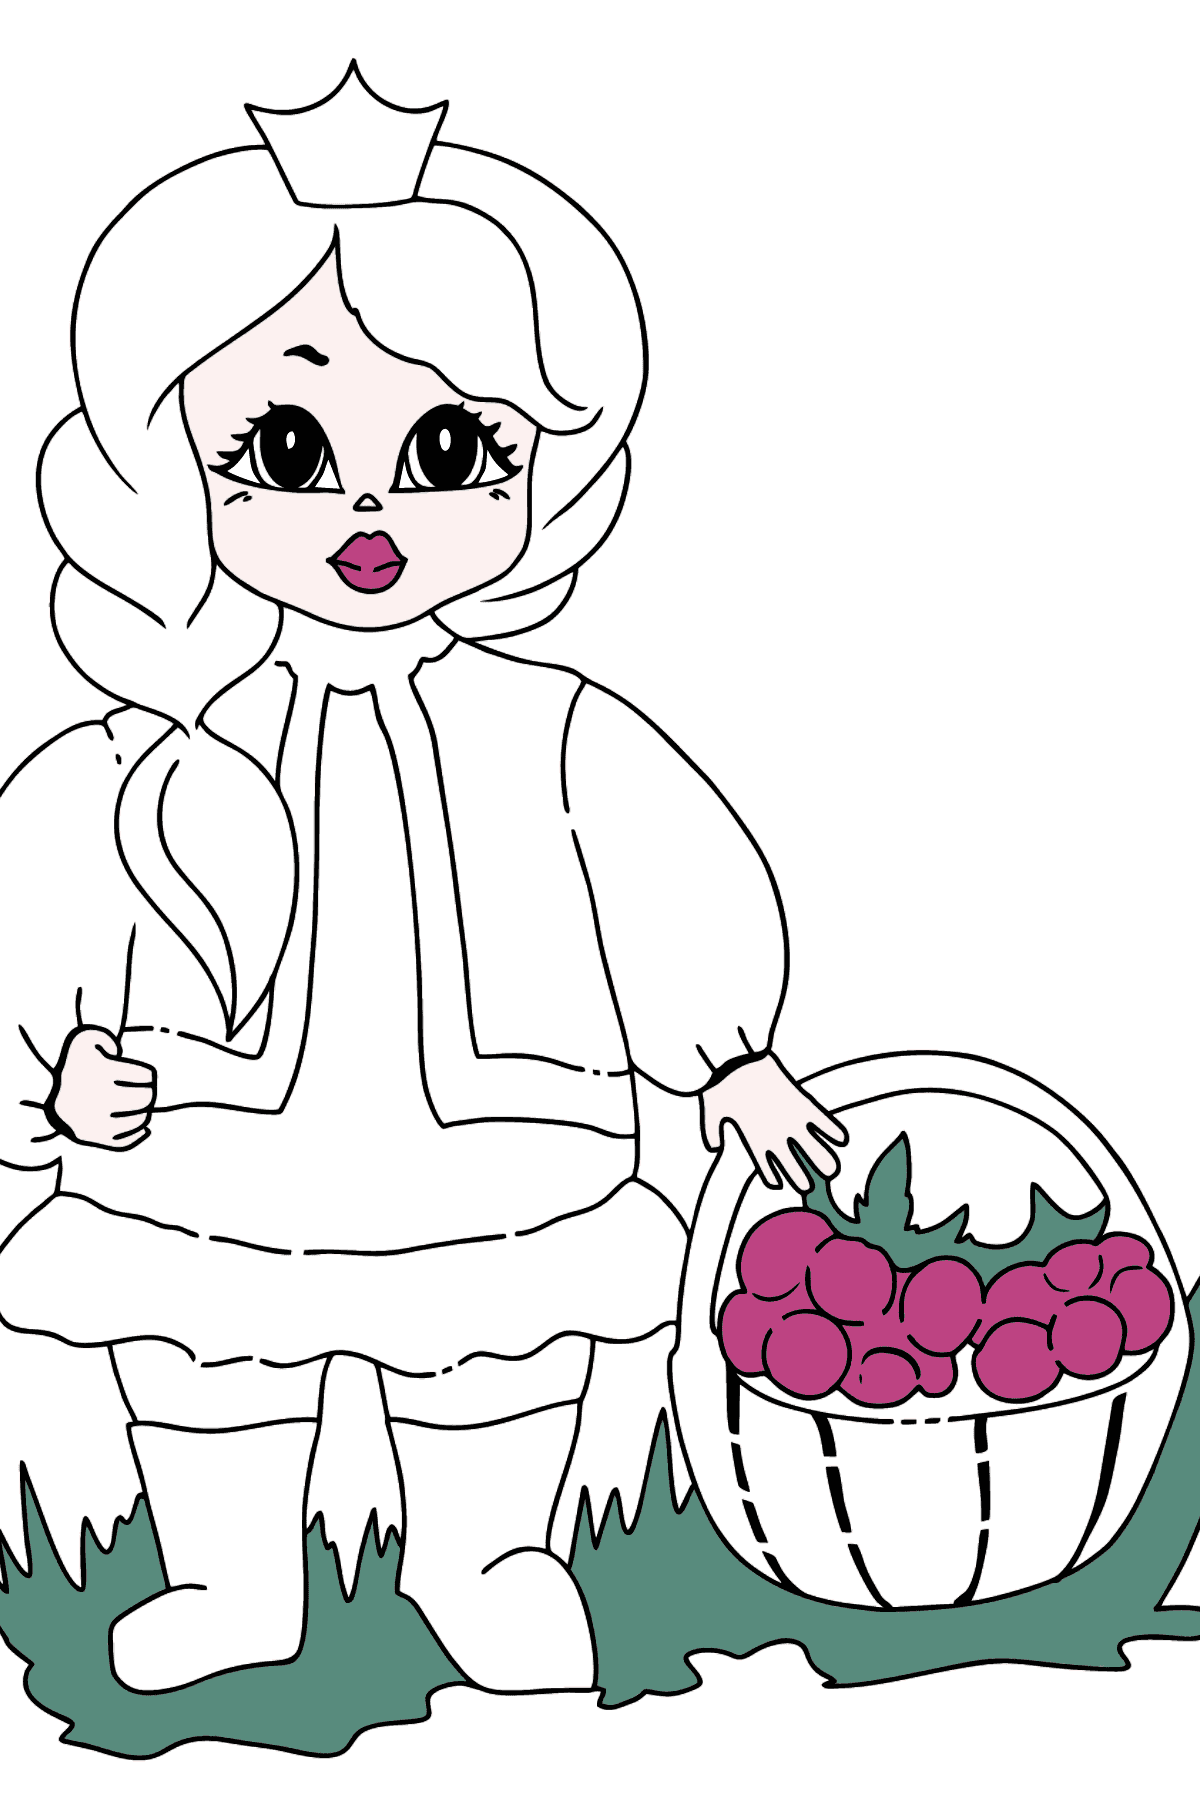 Coloring Picture - A Princess with a Basket - Coloring Pages for Kids